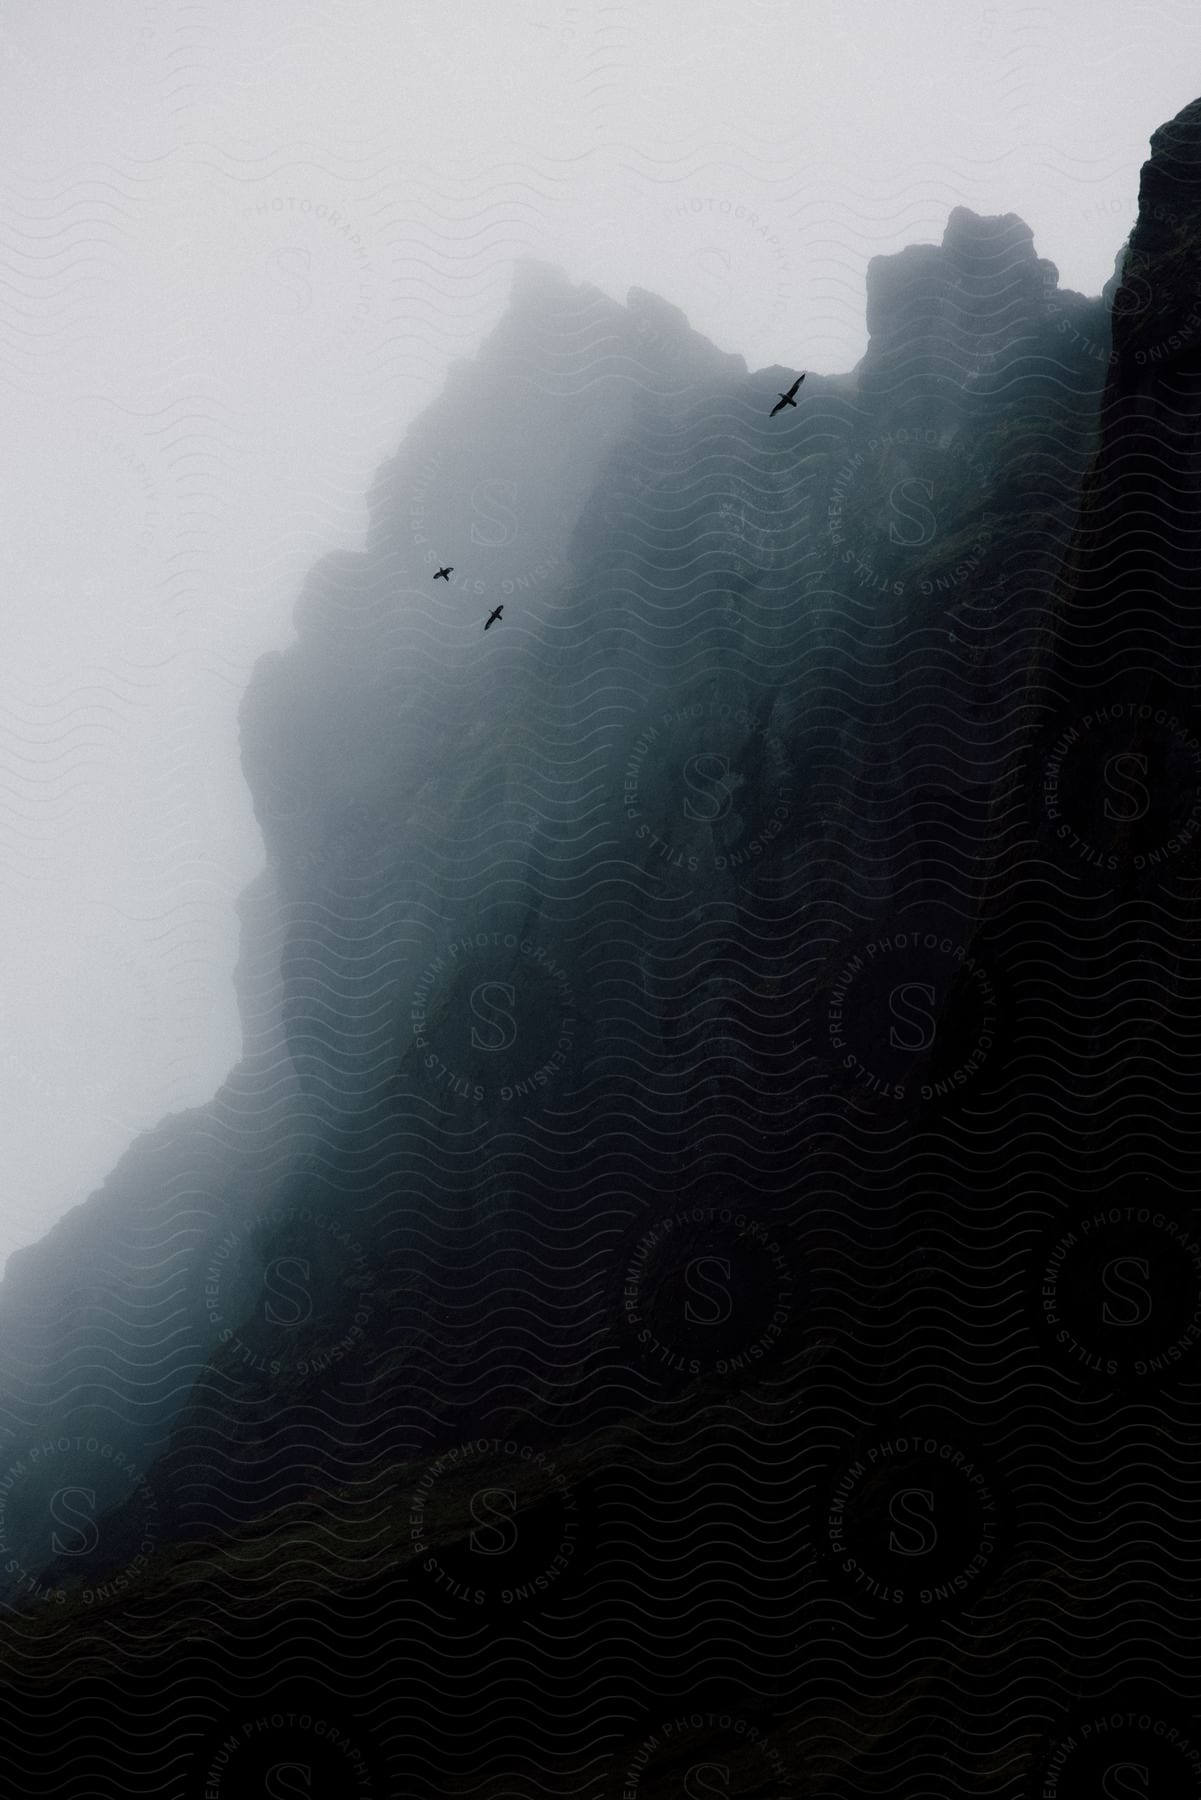 Bird soaring over foggy mountains in icelands wilderness